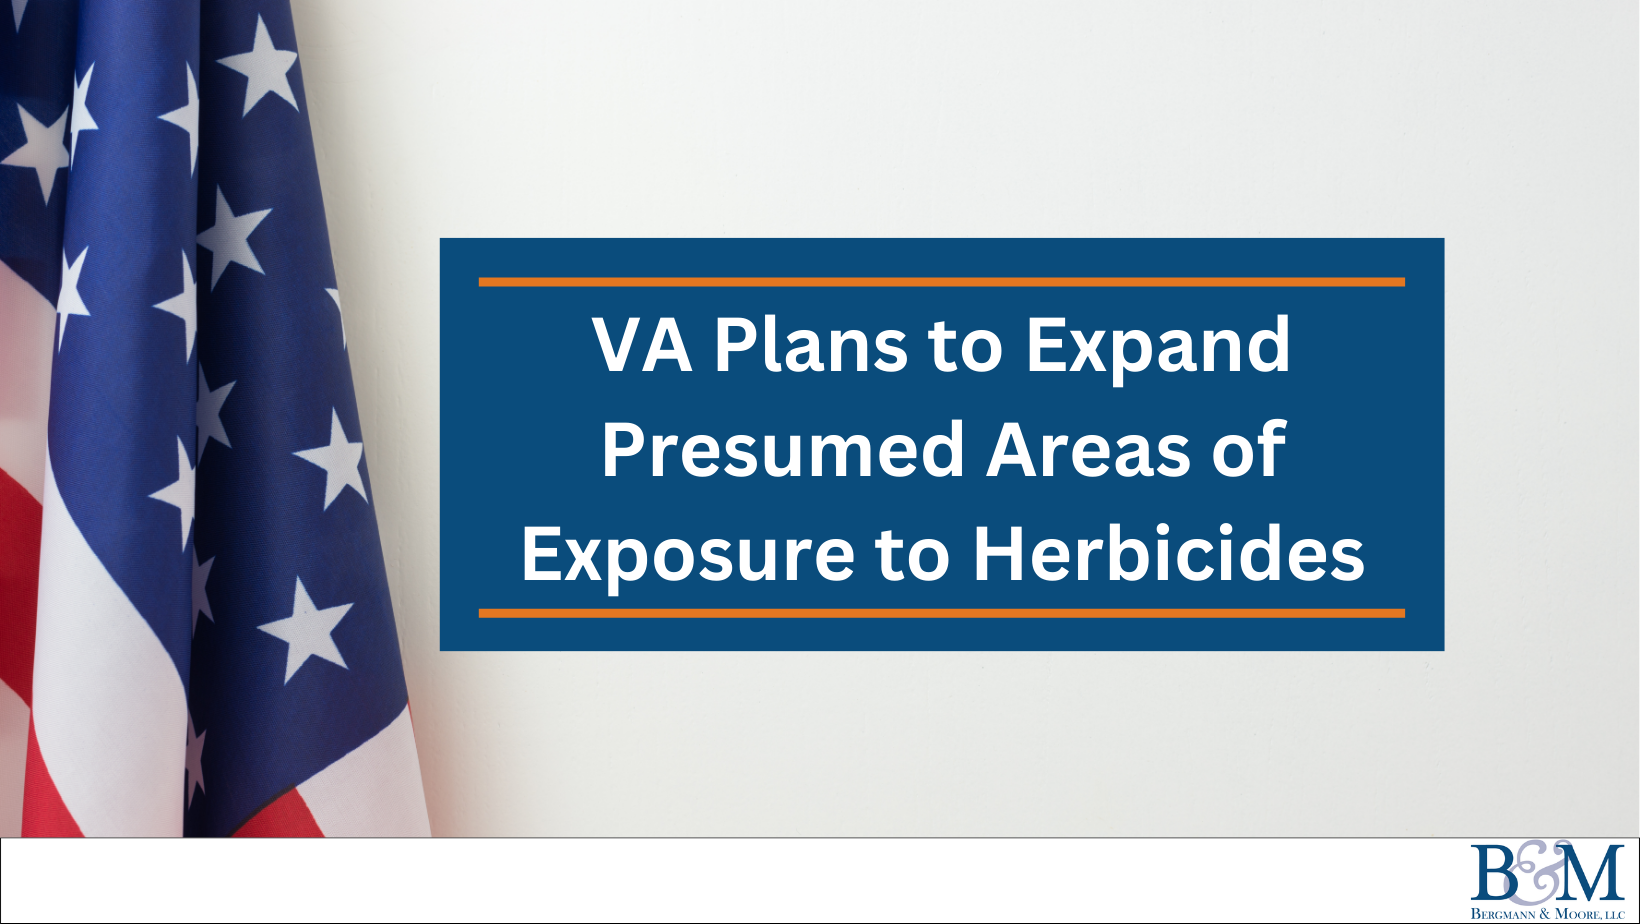 VA plans to expand presumed areas of exposure to herbicides